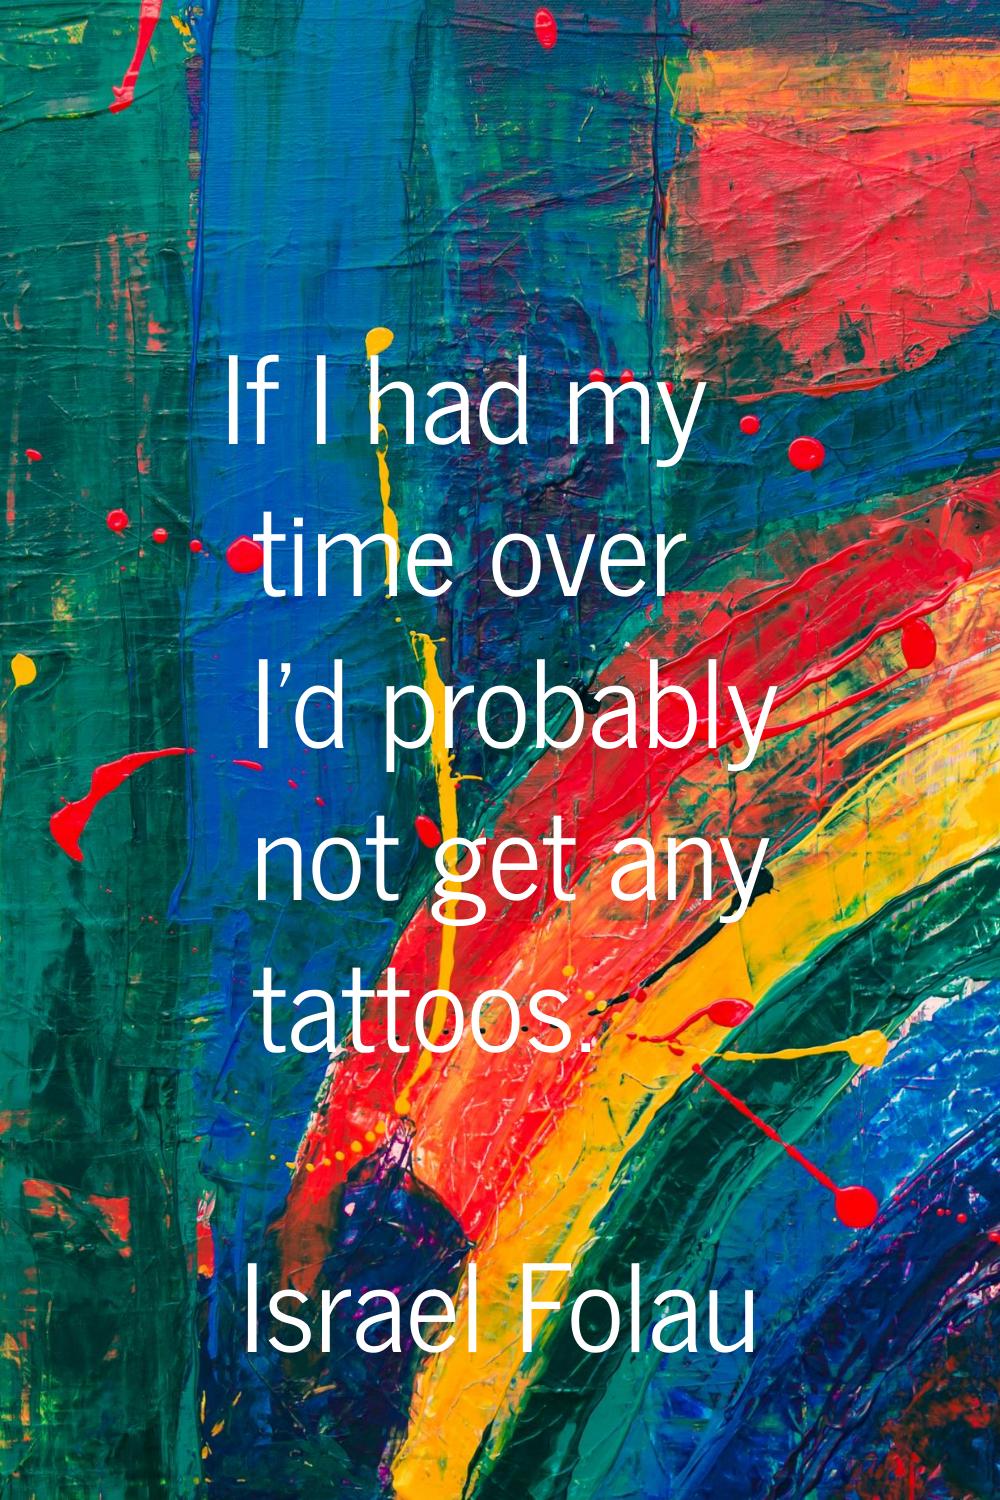 If I had my time over I'd probably not get any tattoos.